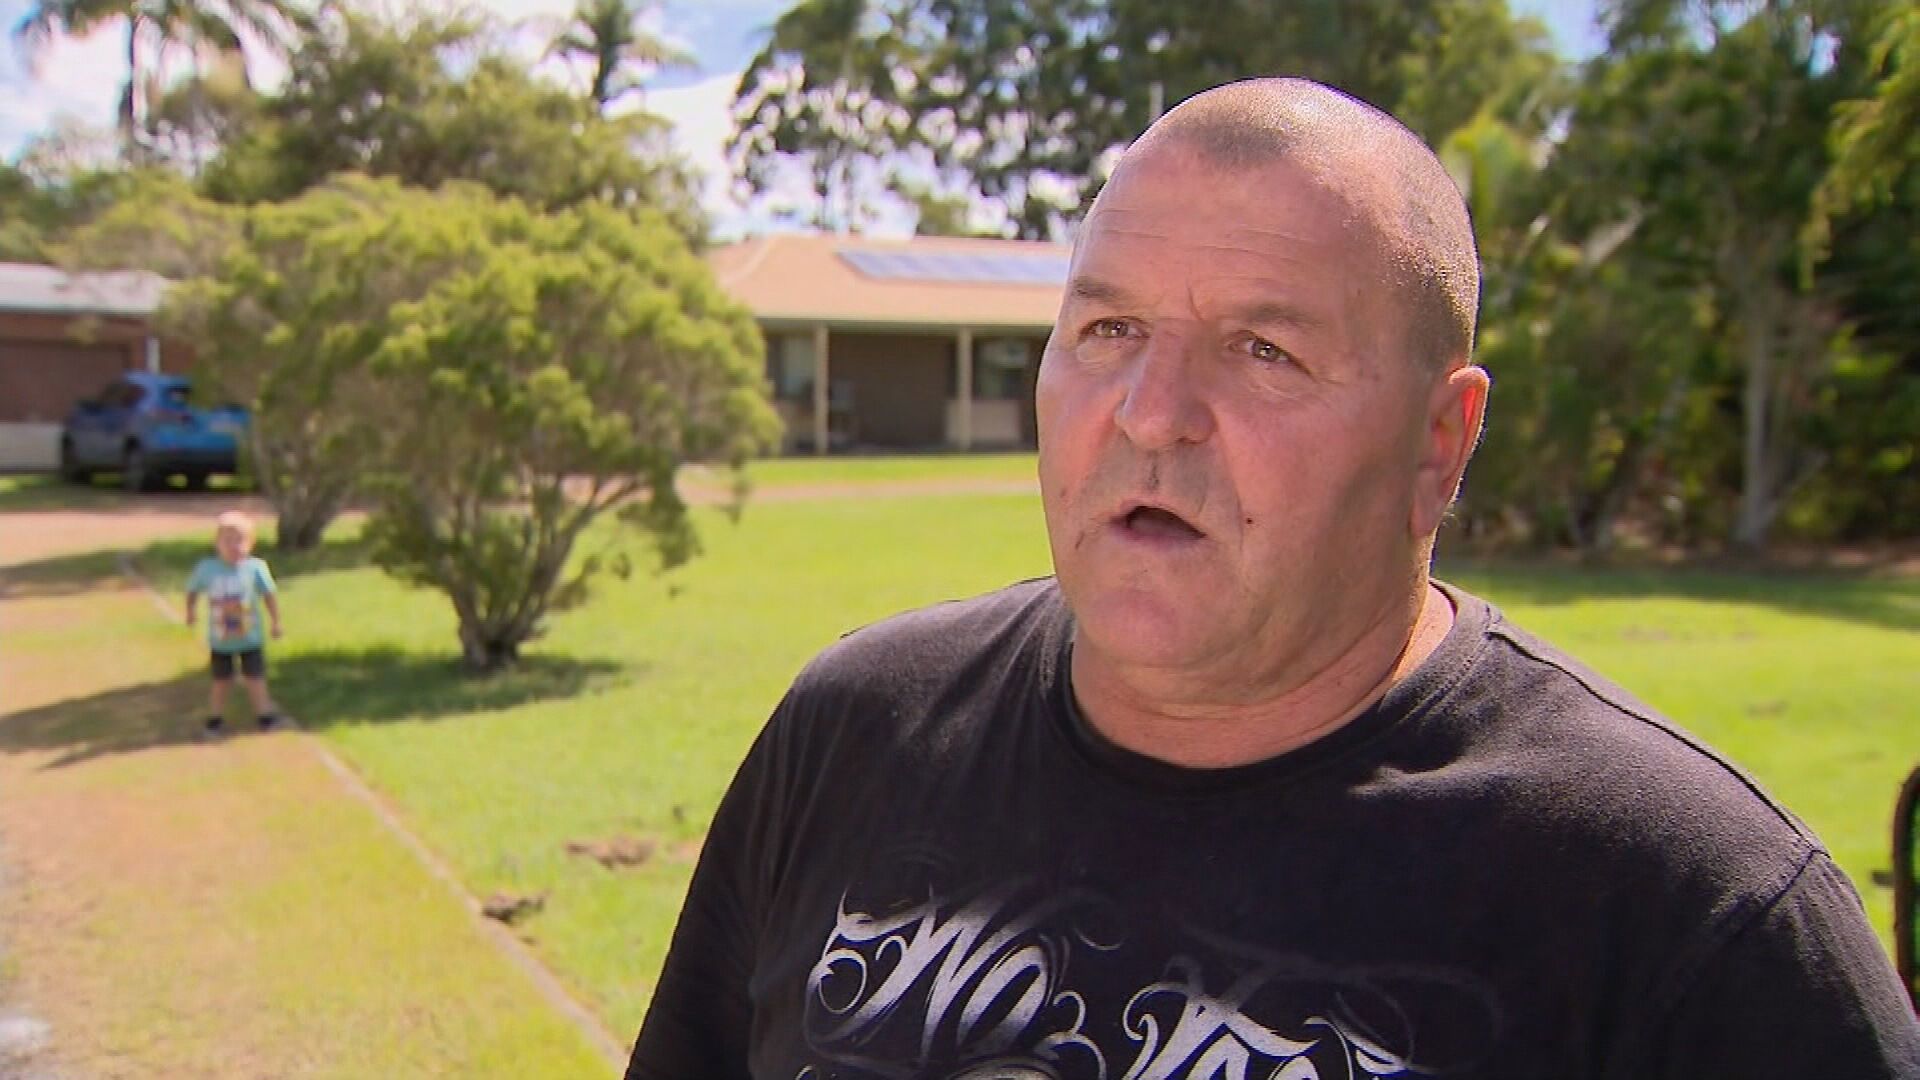 Neighbour Douglas Hutchings helped police put the injured woman into an ambulance. Burpengary East